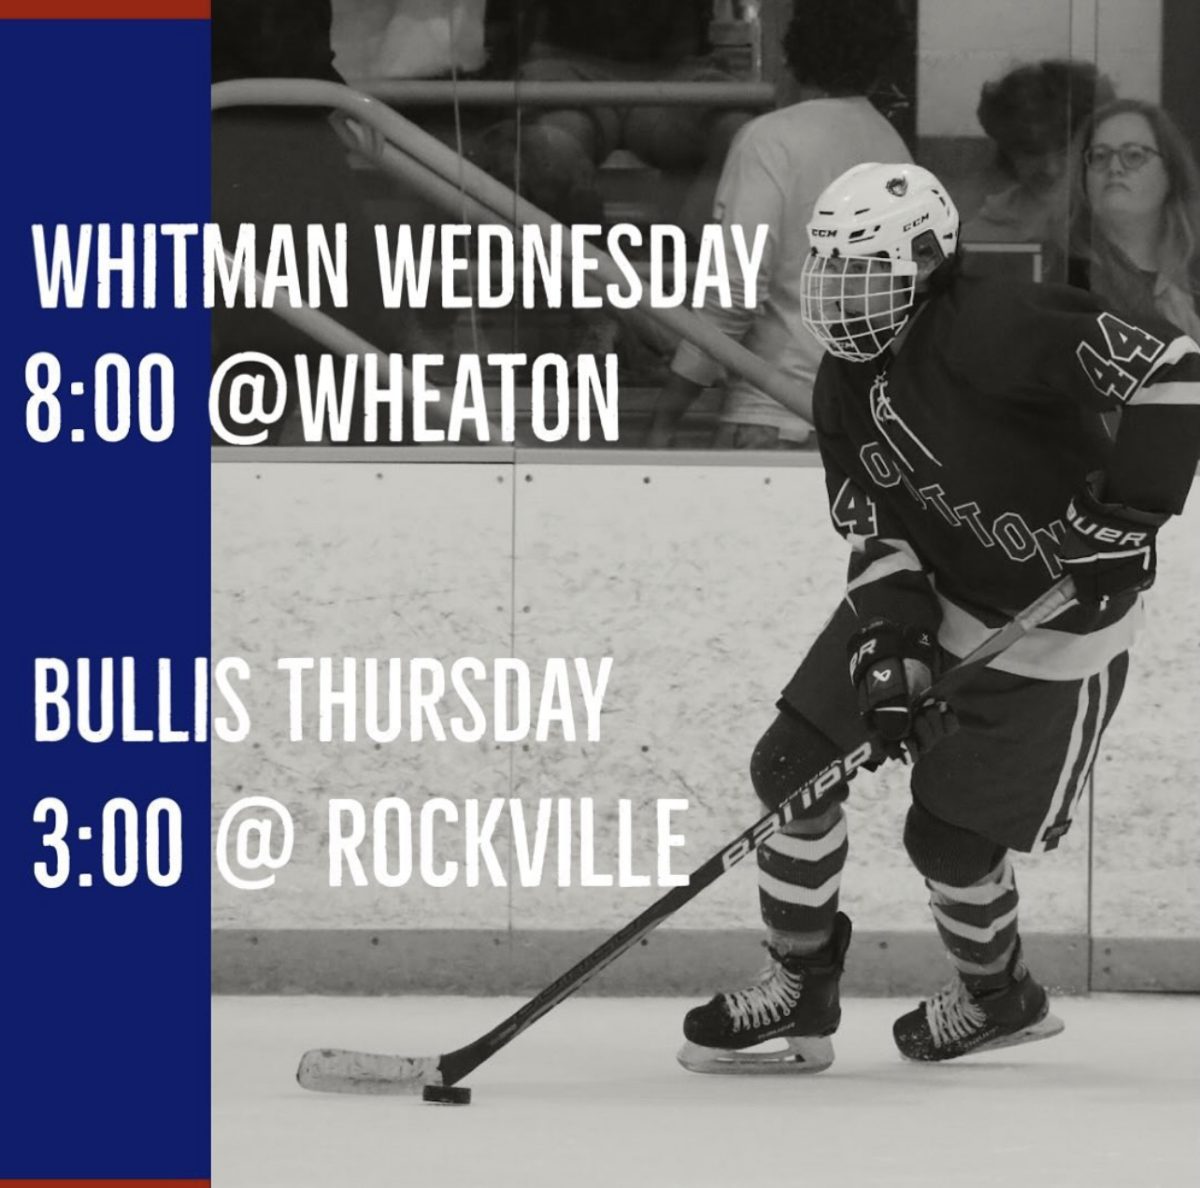 The hockey team has two games coming up where they hope to pick up two wins.